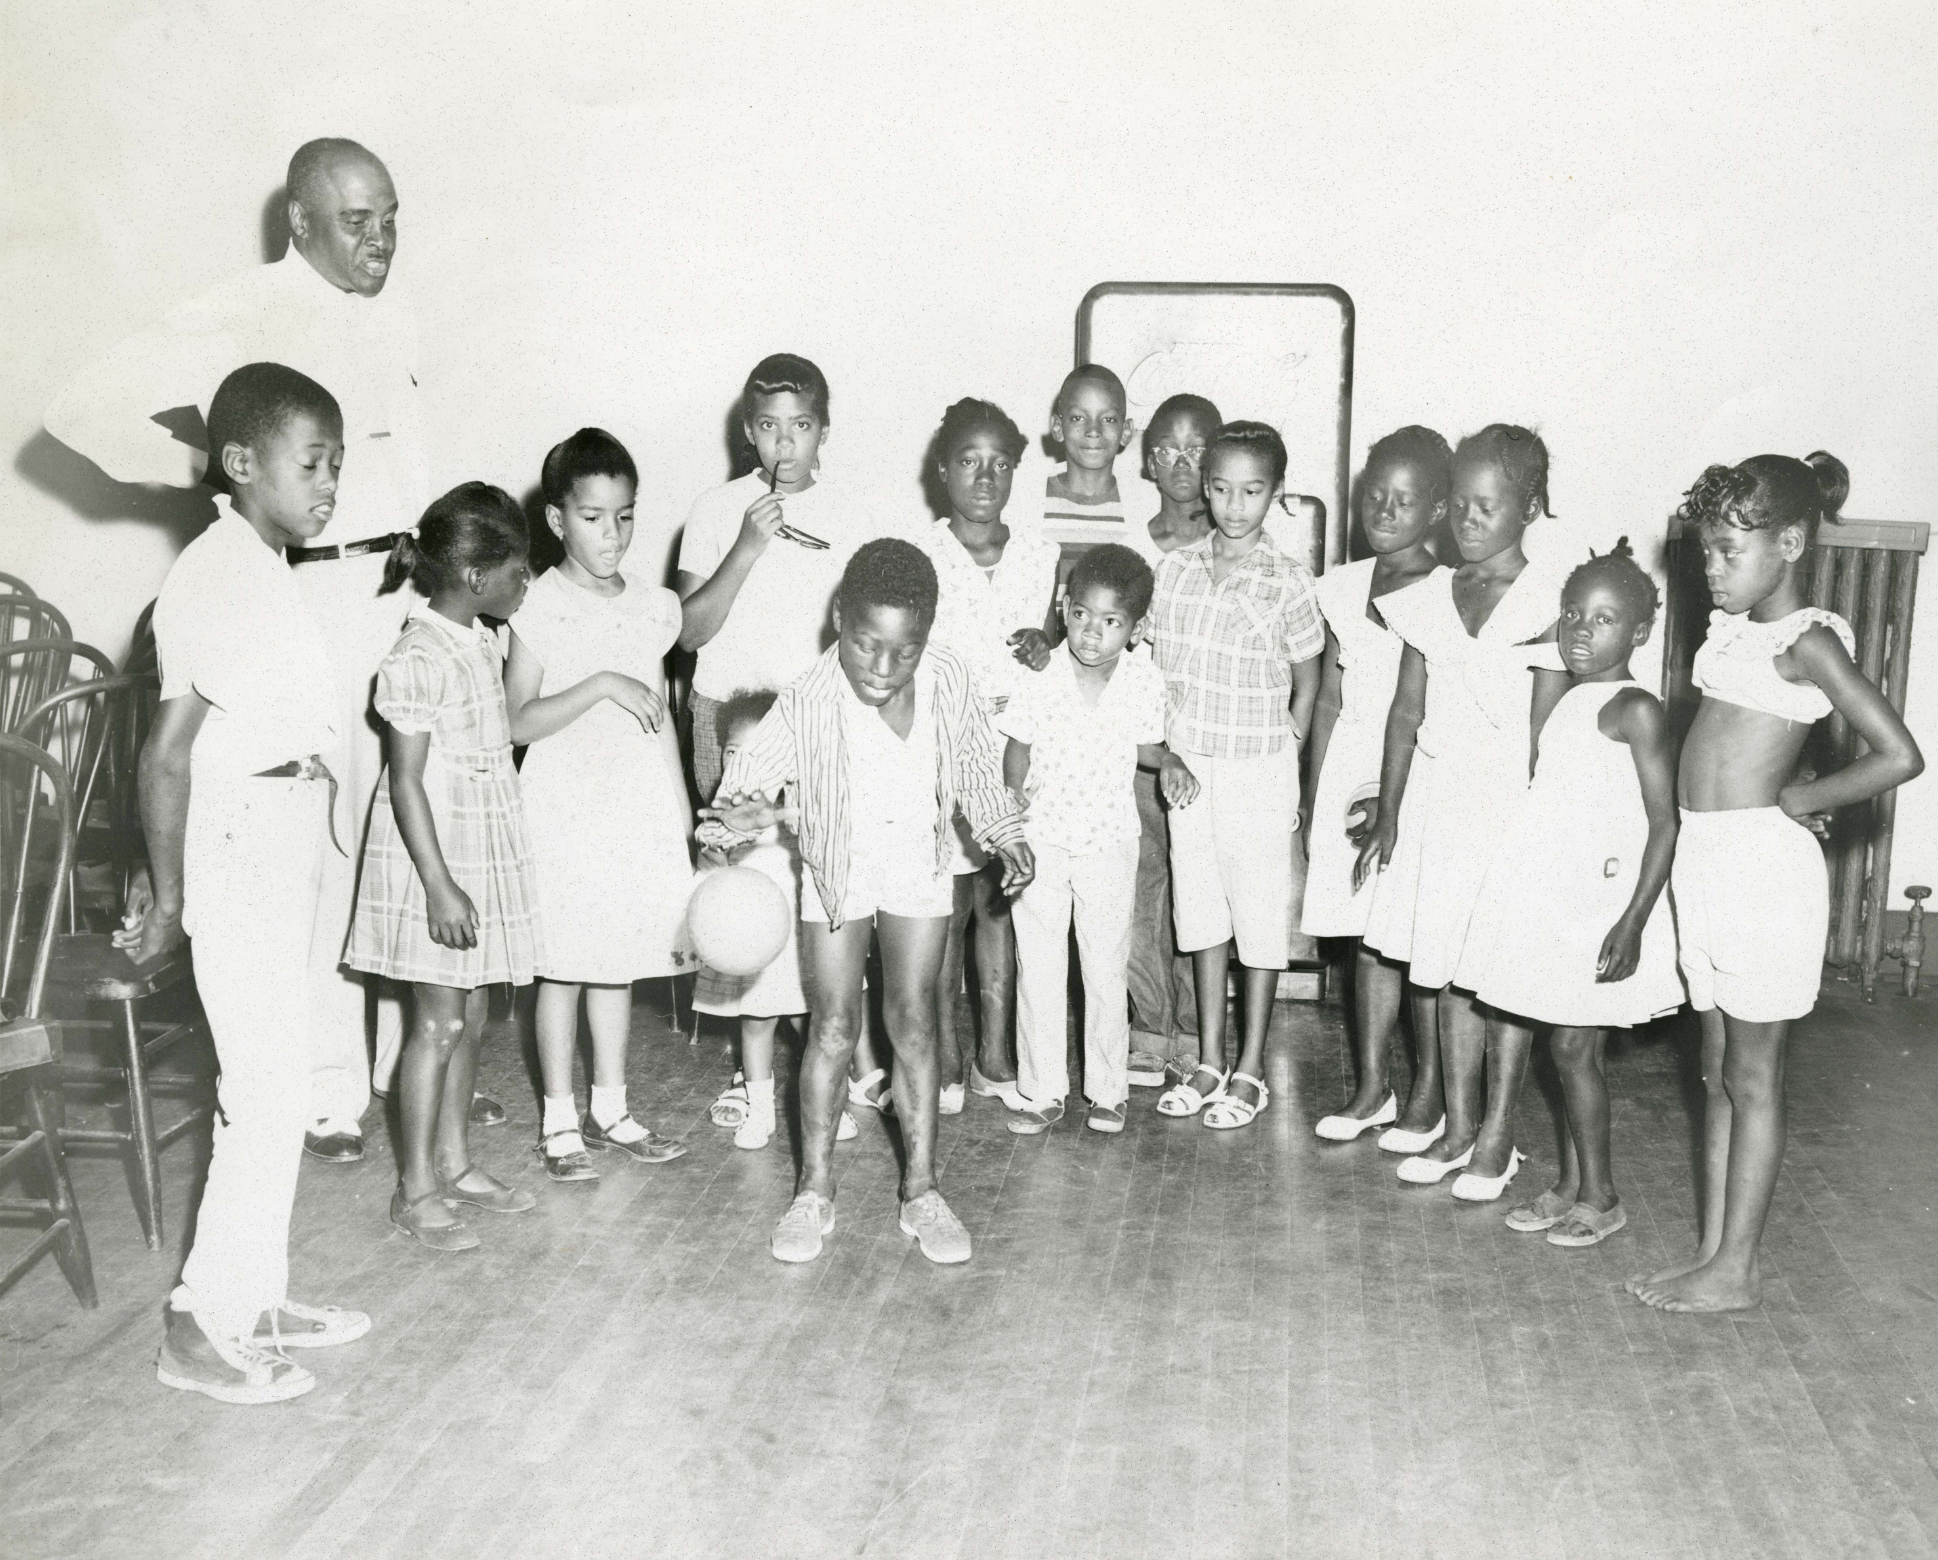 A group of children and one adult are gathered around a young boy and watching him bounce a ball.